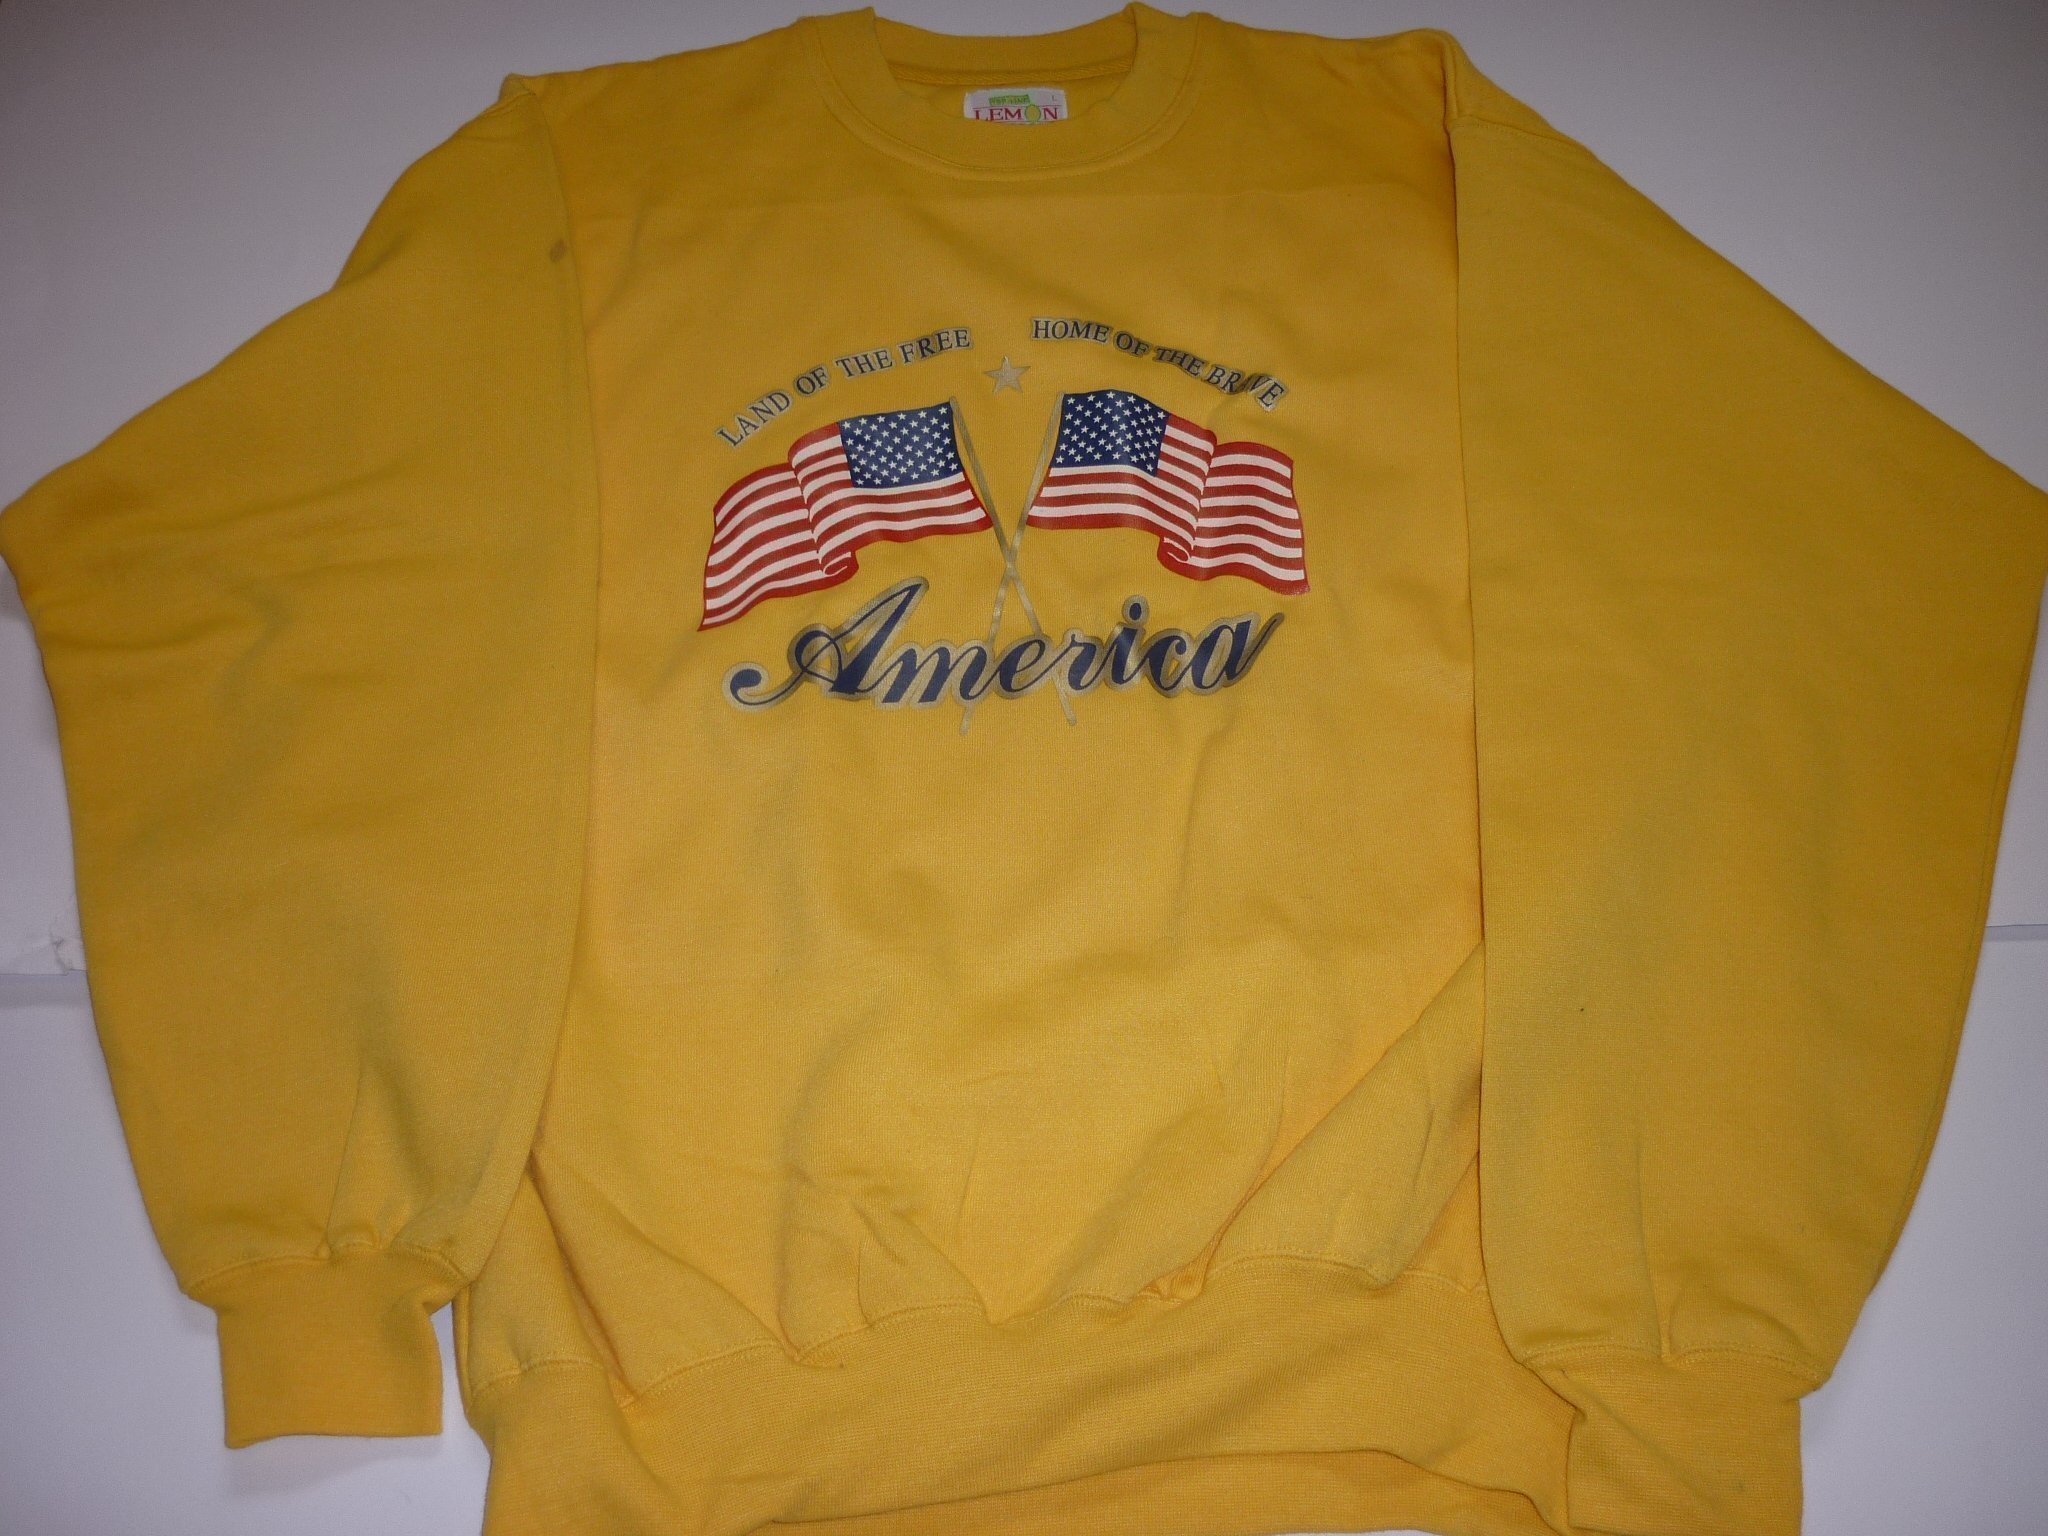 American Flag Printed Yellow Sweatshirt for Men || Guaranteed Low Price || M/L & L/XL || 50% Discount || Free Home Delivery (Post Nord) || Art. No. 20170404-5622